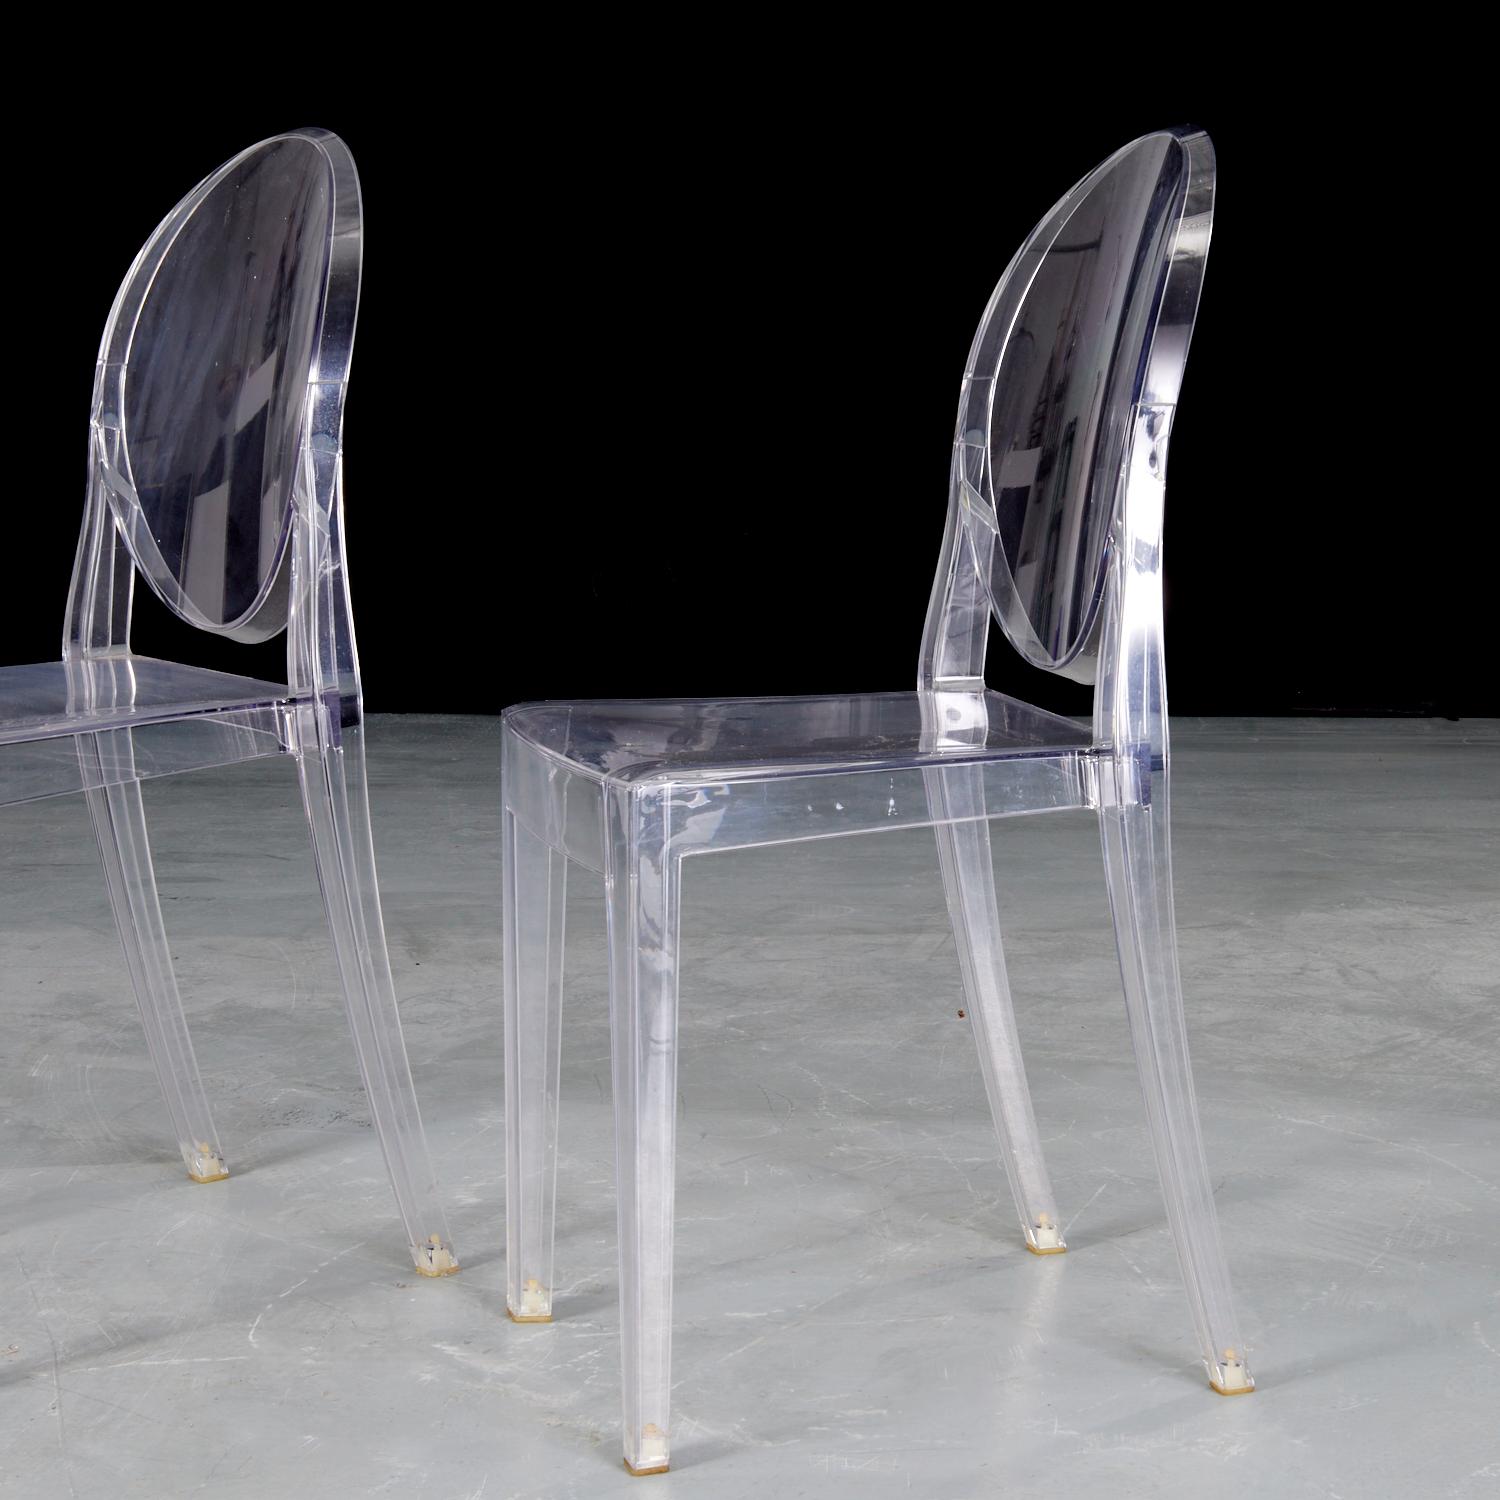 21st c., Starck for Kartell, a pair of clear Victoria Ghost chairs. marked on back.

Designed by Philippe Starck, the Kartell Victoria Ghost Chair is a chair born of classic lines and modern technologies. The rounded backrest recalls the shape of